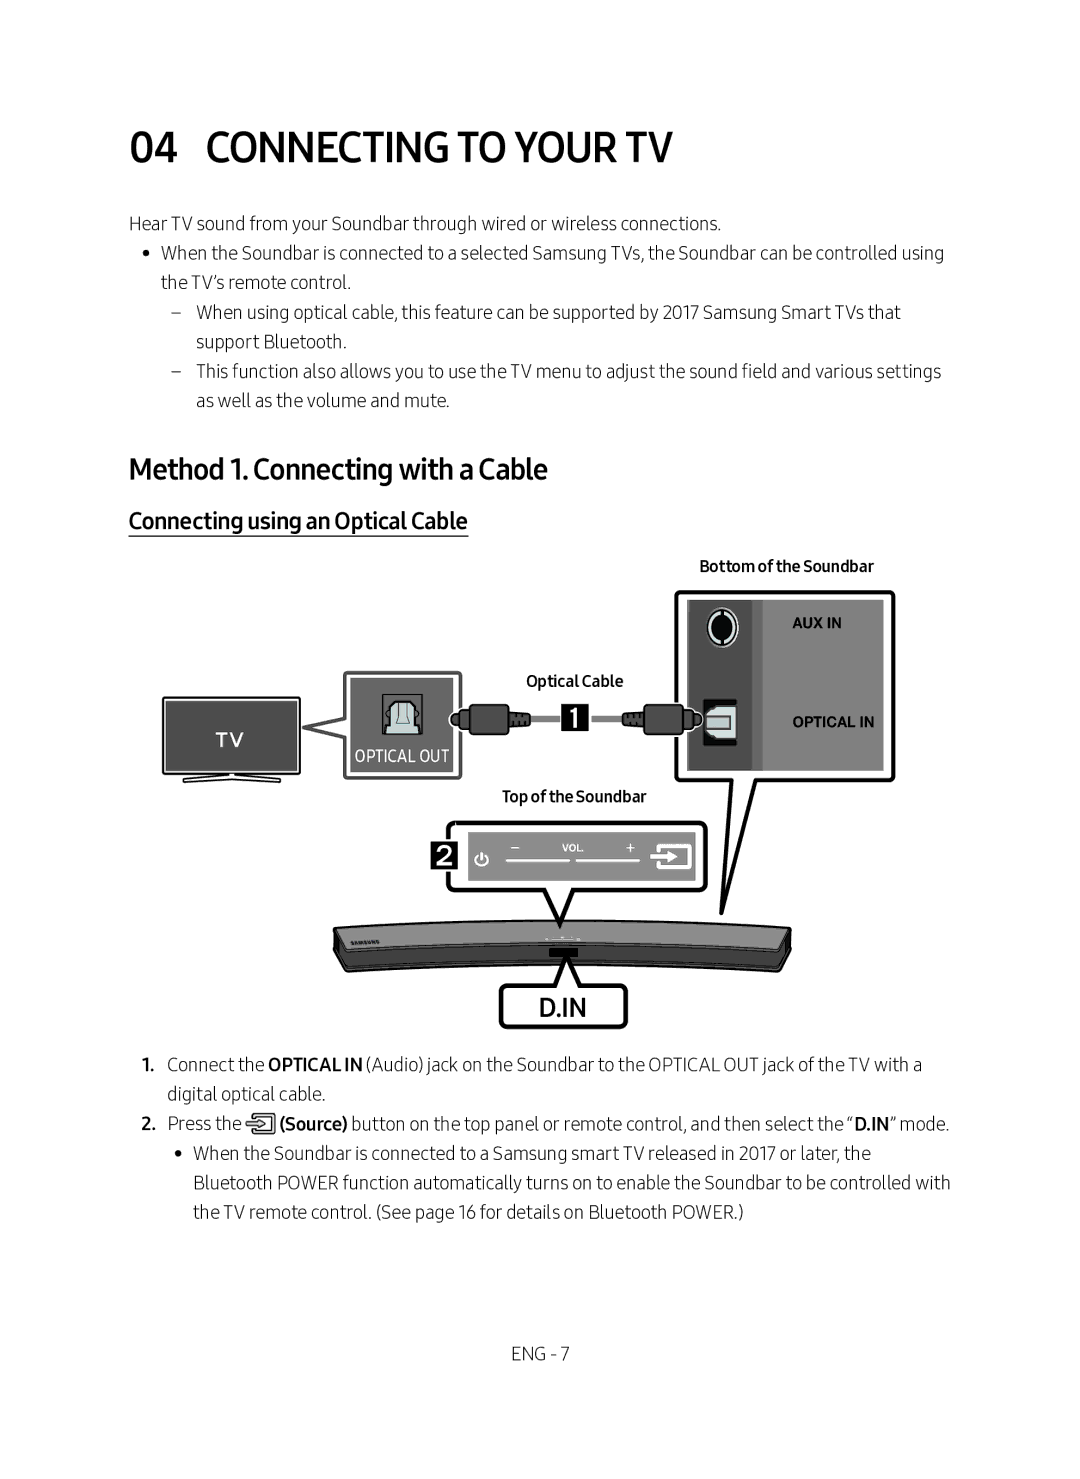 Samsung HW-M4501/SQ manual Connecting to your TV, Method 1. Connecting with a Cable, Connecting using an Optical Cable 